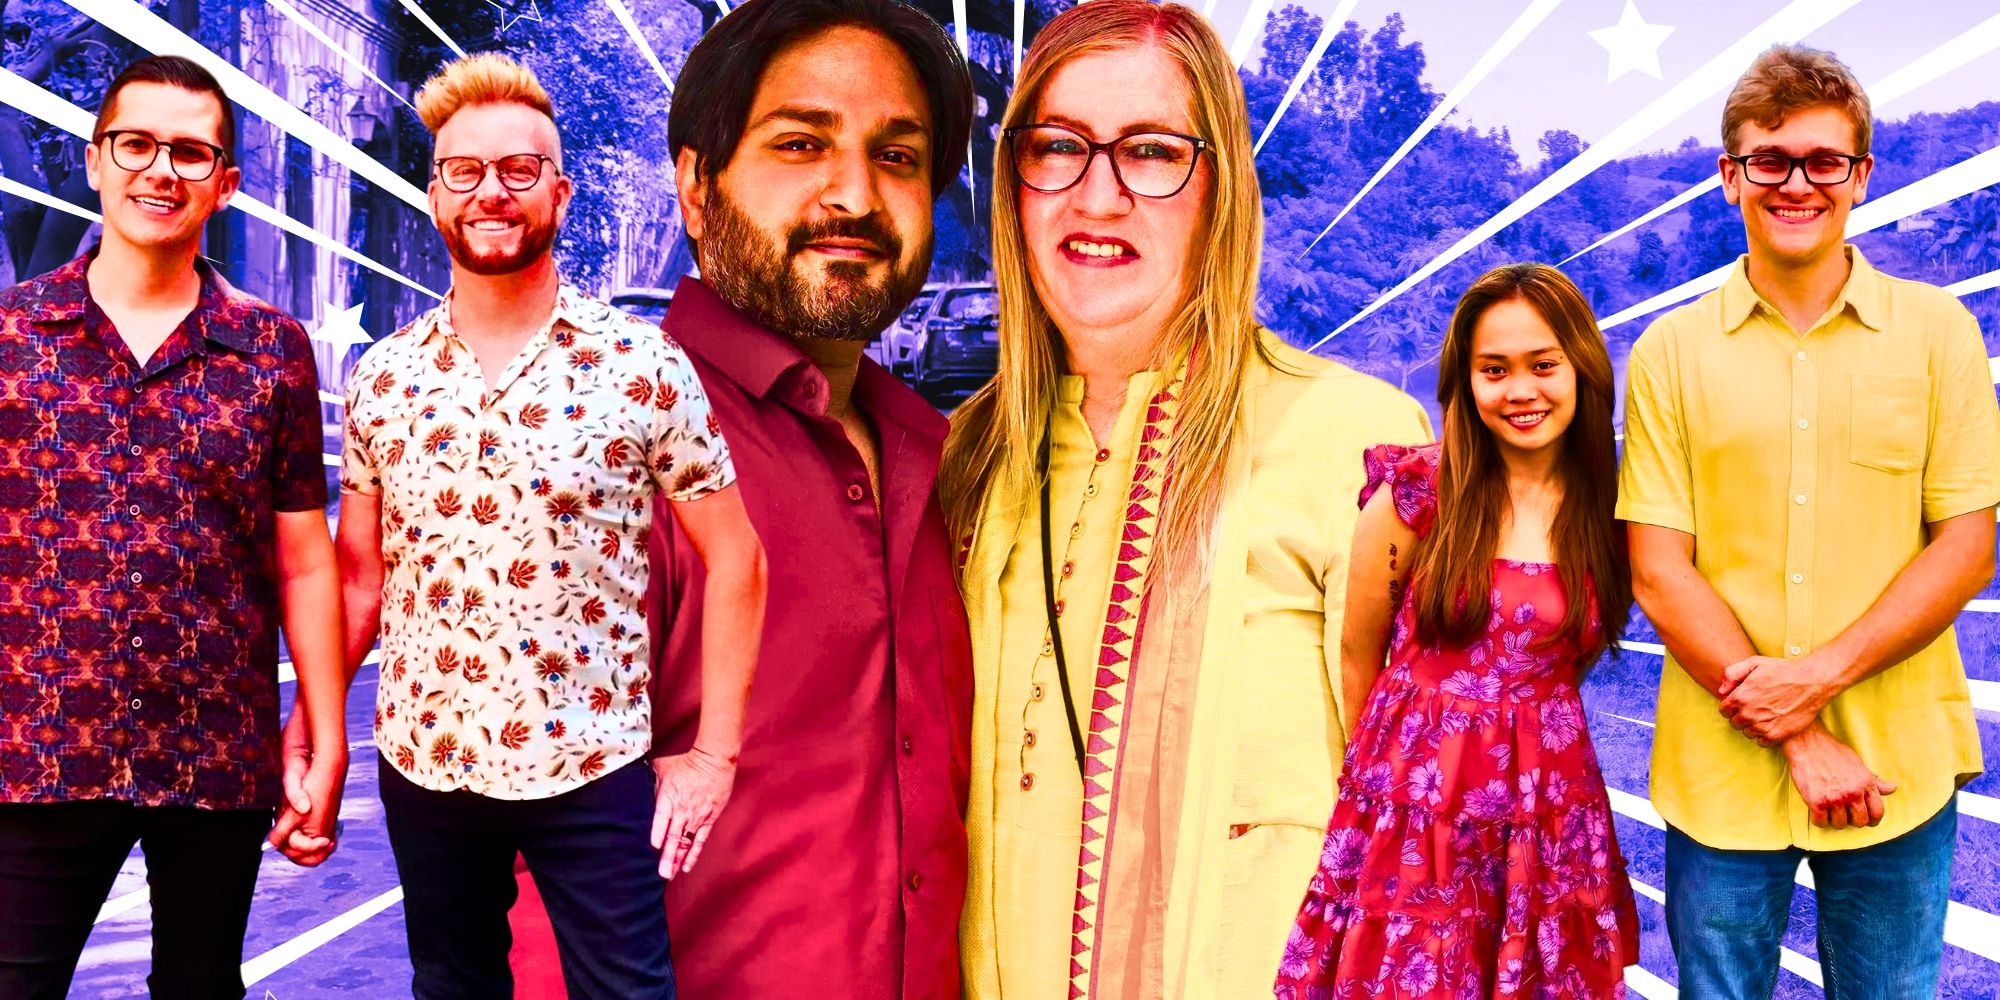 90 Day Fiance's Kenny & Armando, Jenny & Sumit, and Mary and Brandan smiling for the camera